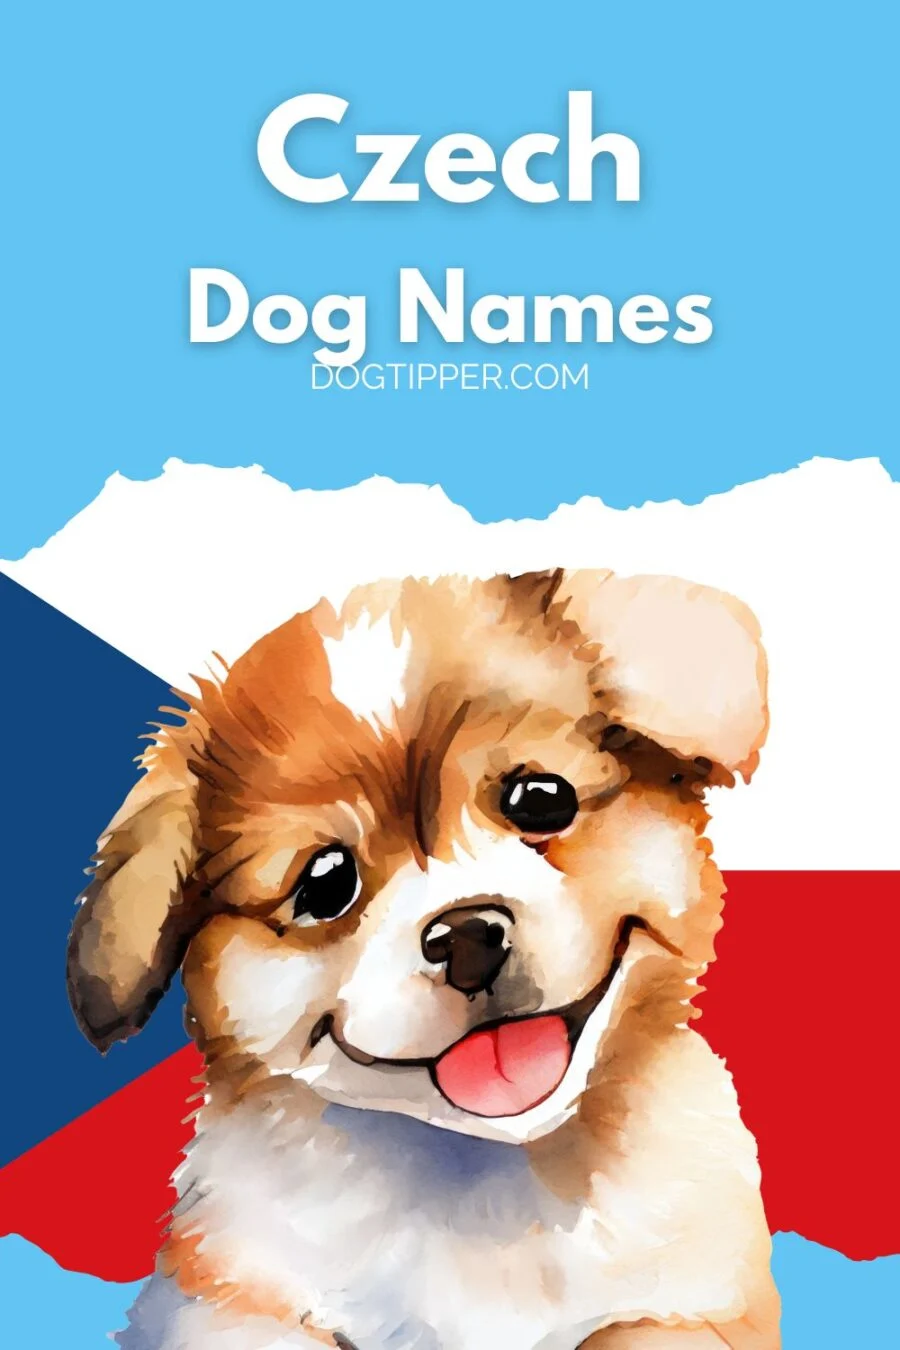 Czech names for dogs -- image of cartoon puppy with Czech Republic flag in background